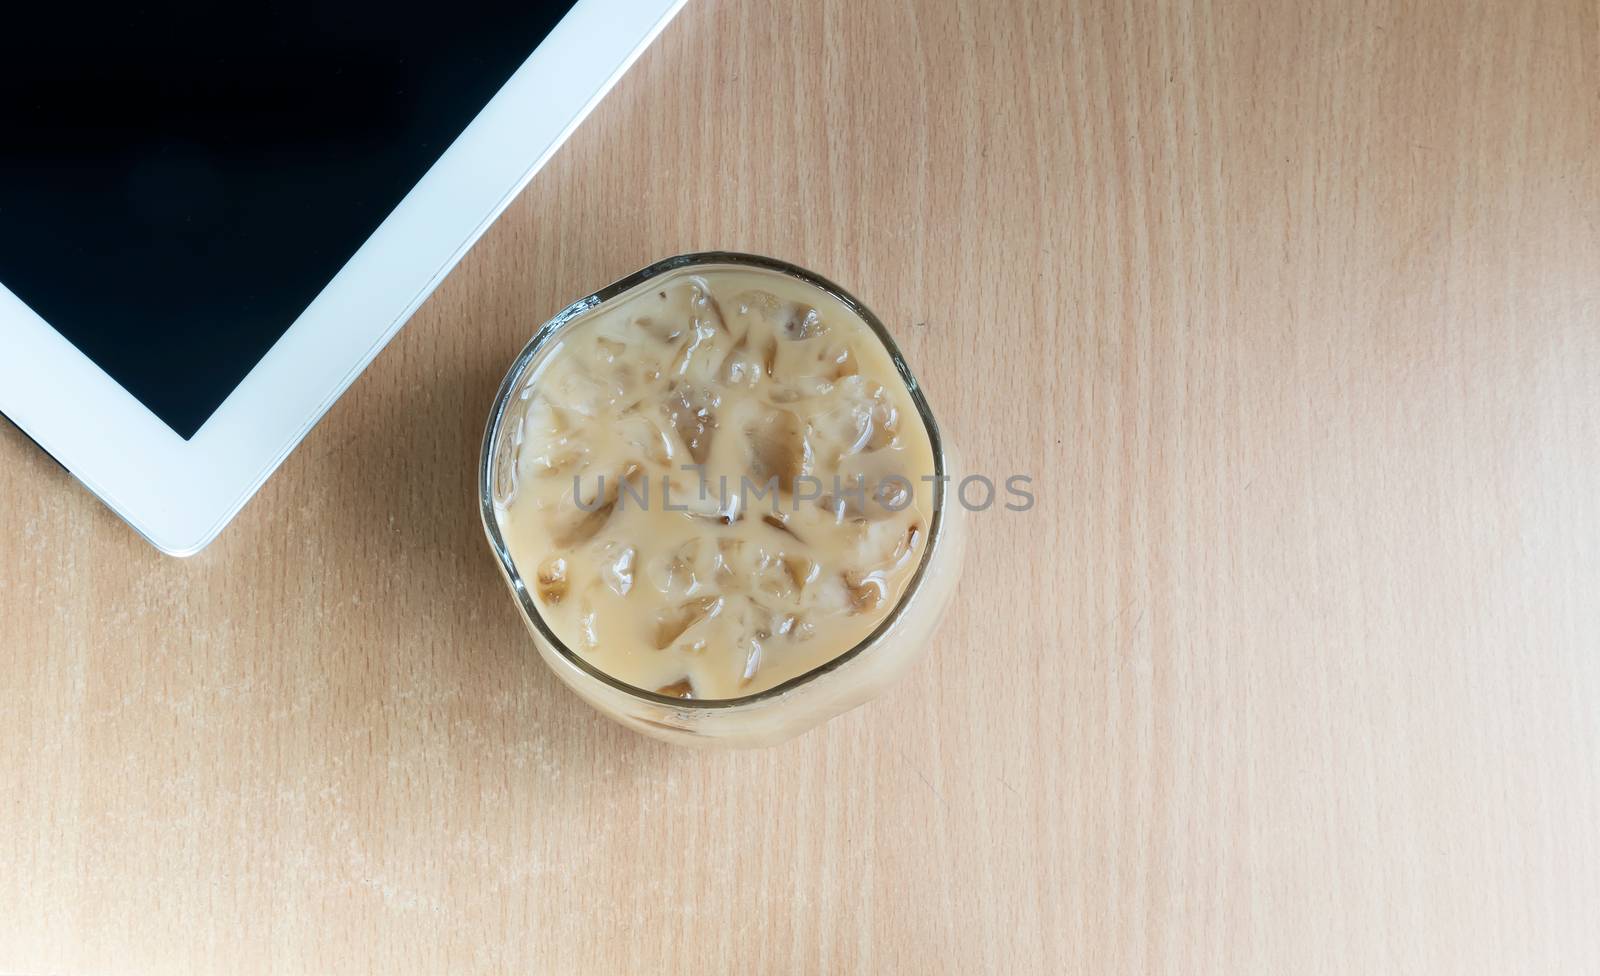 Ice coffee mugs and tablet placed on a wooden table.